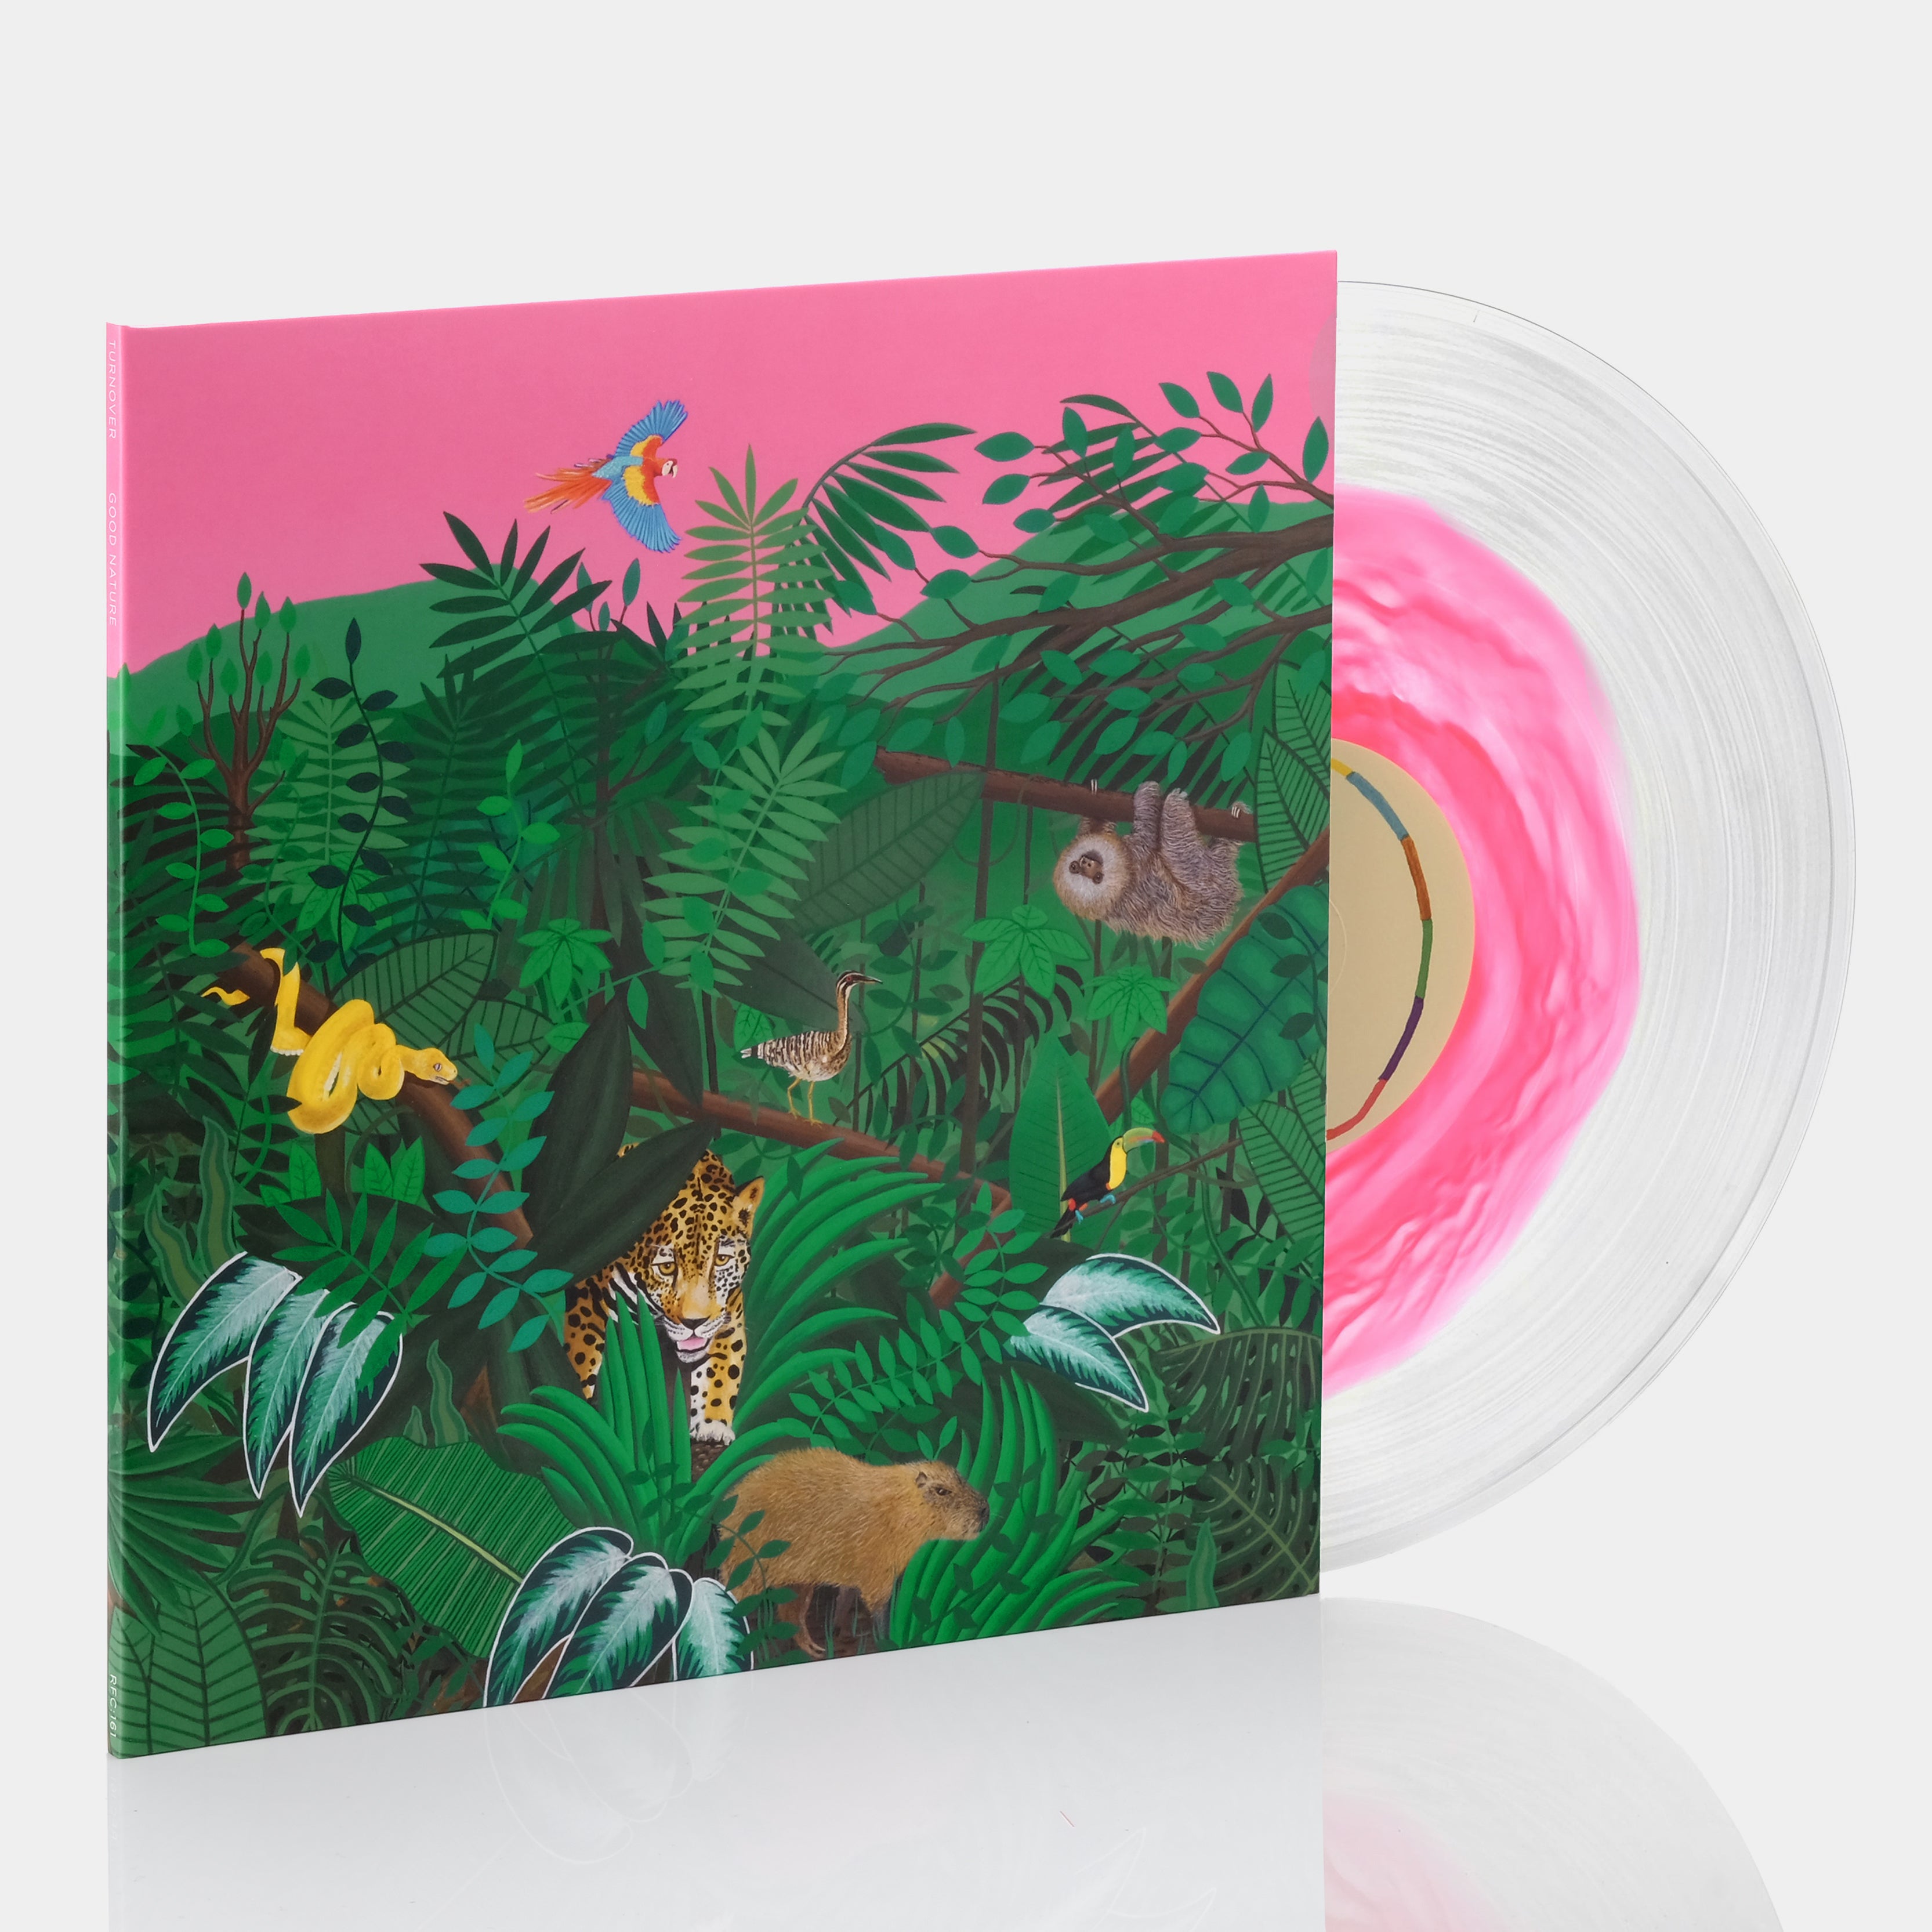 Turnover - Good Nature LP Clear & Pink Swirl Vinyl Record